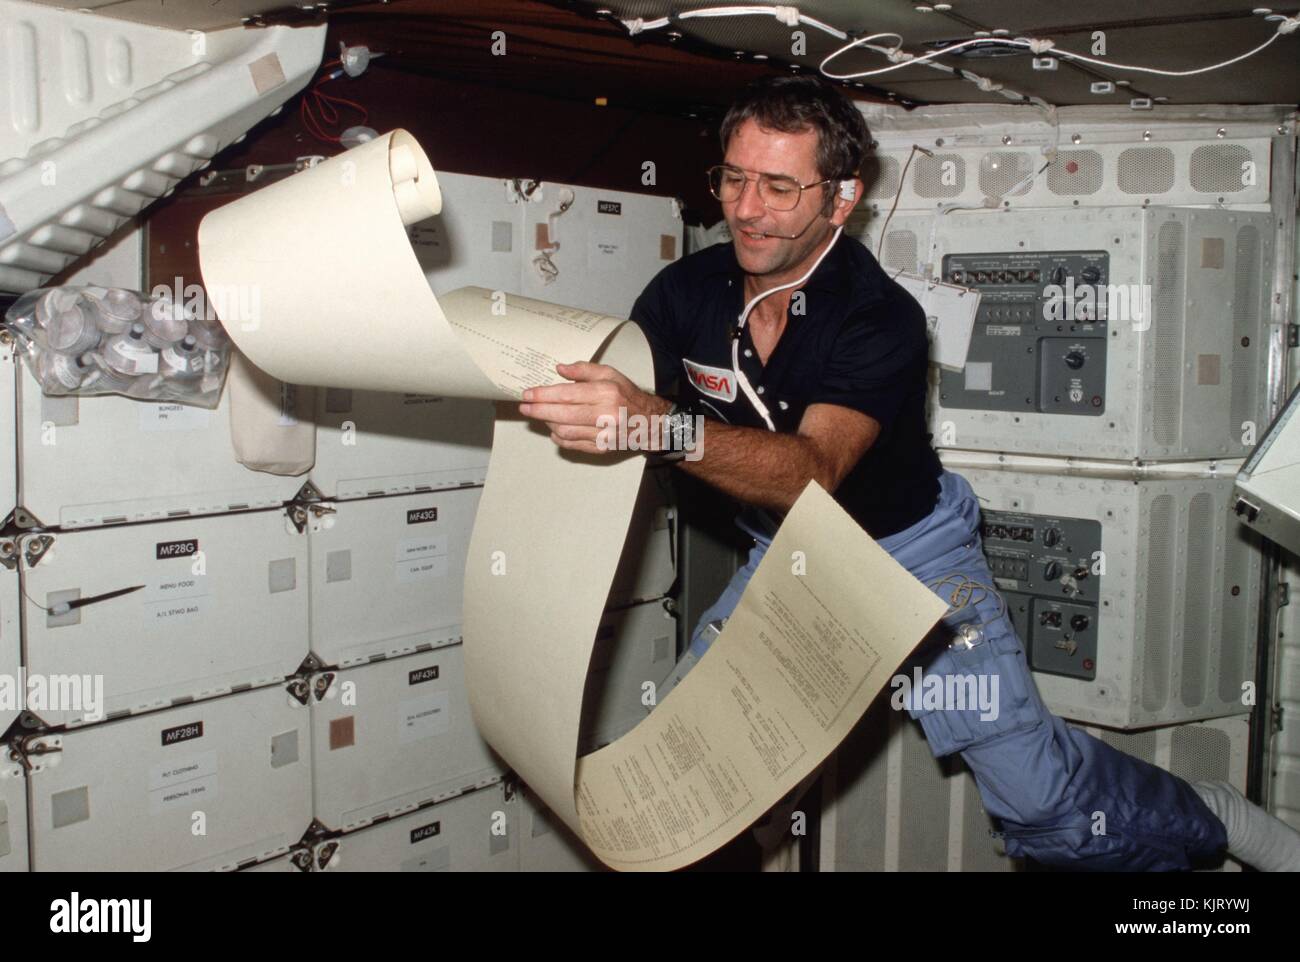 NASA STS-2 Space Shuttle Columbia prime crew astronaut Richard Truly reads teleprinter copy paper while floating in the middeck of the spacecraft November 14, 1981 in Earth orbit.  (photo by Joe H. Engle via Planetpix) Stock Photo